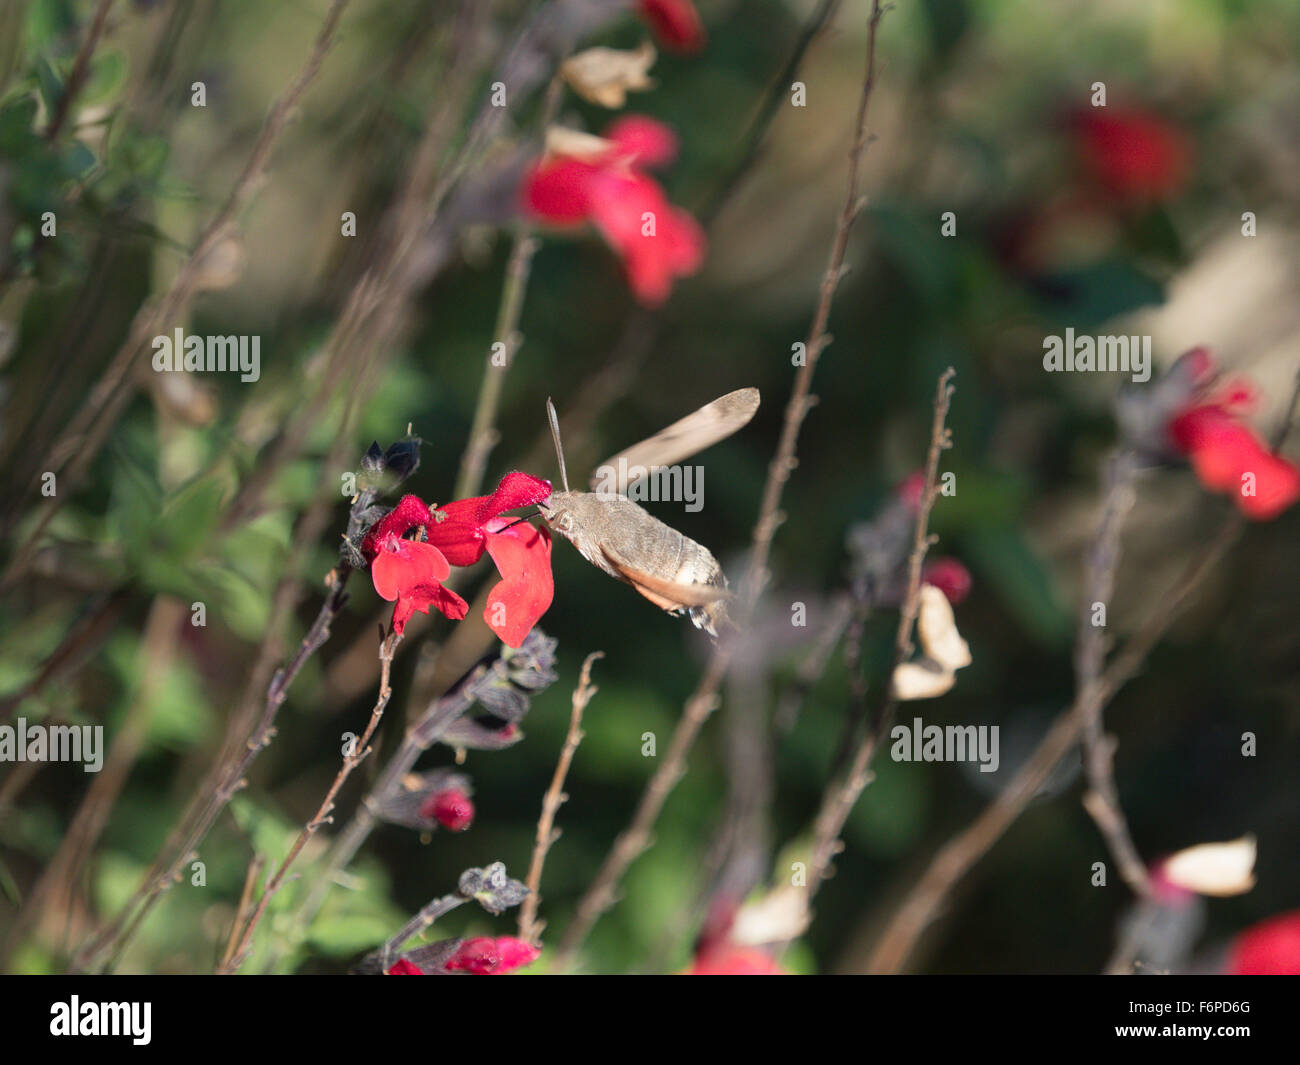 A humming bird  hawk moth fees on nectar from flowers Stock Photo